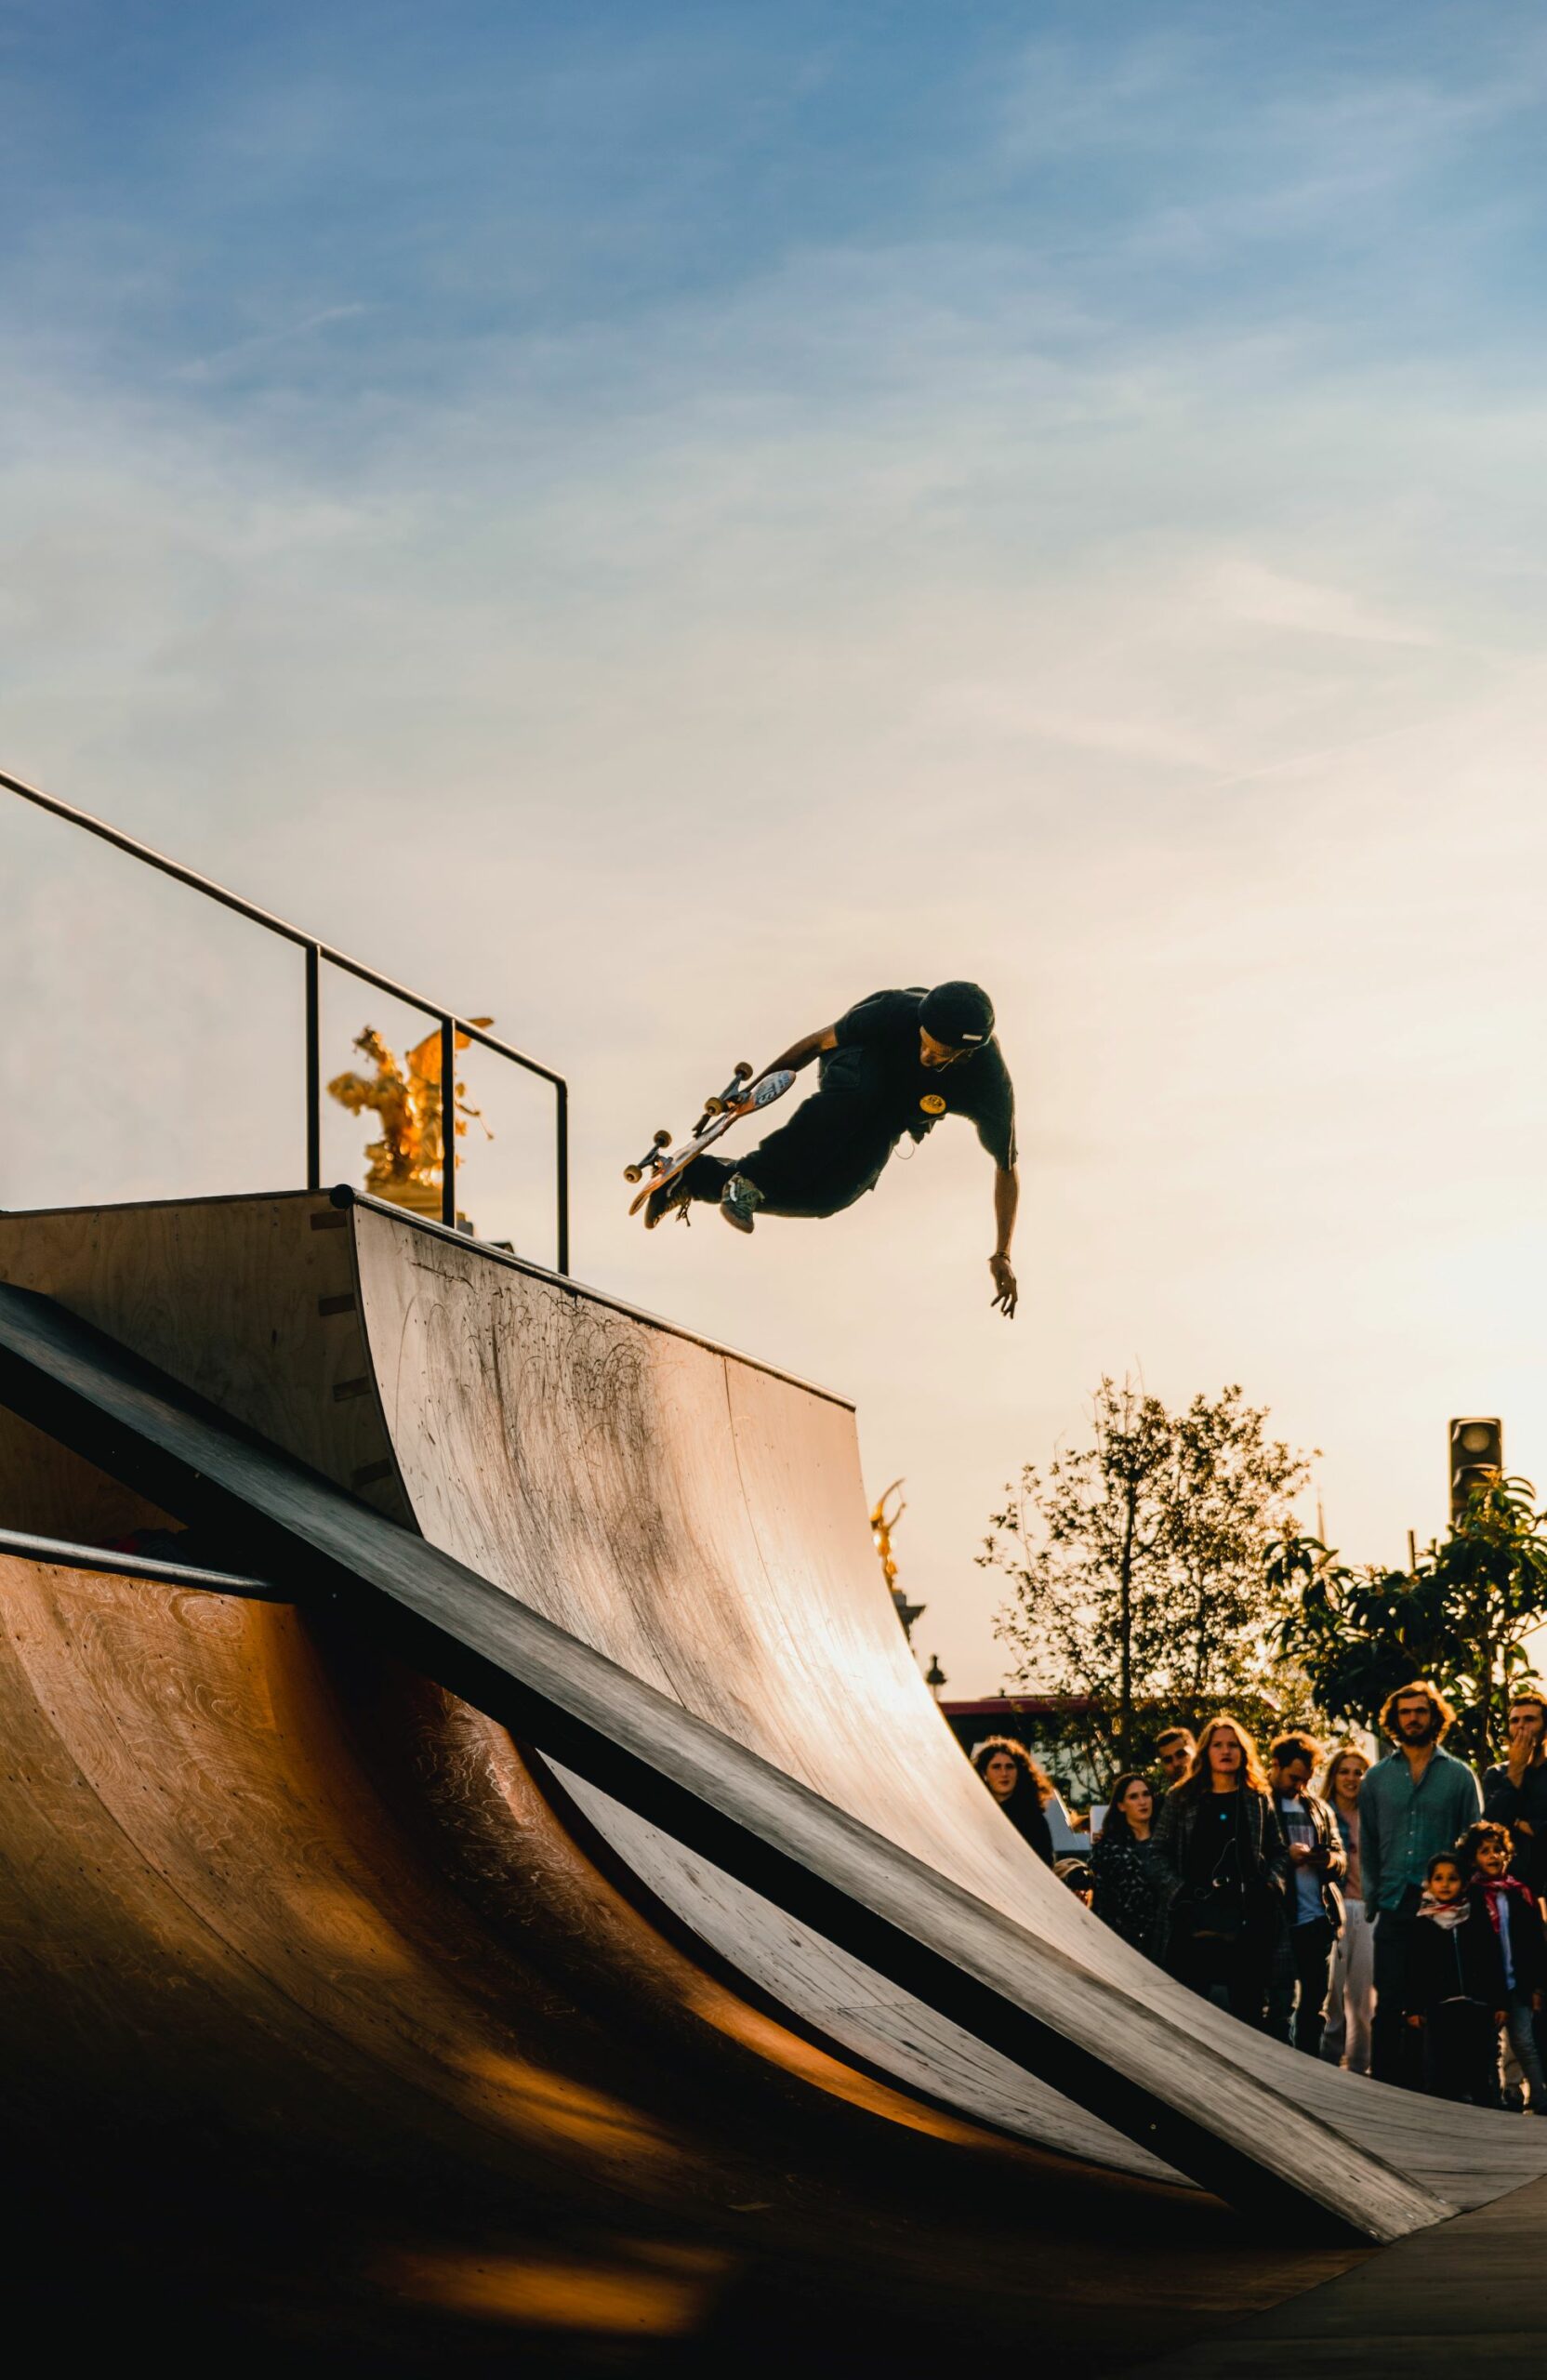 An image of a skateboarder on a ramp.